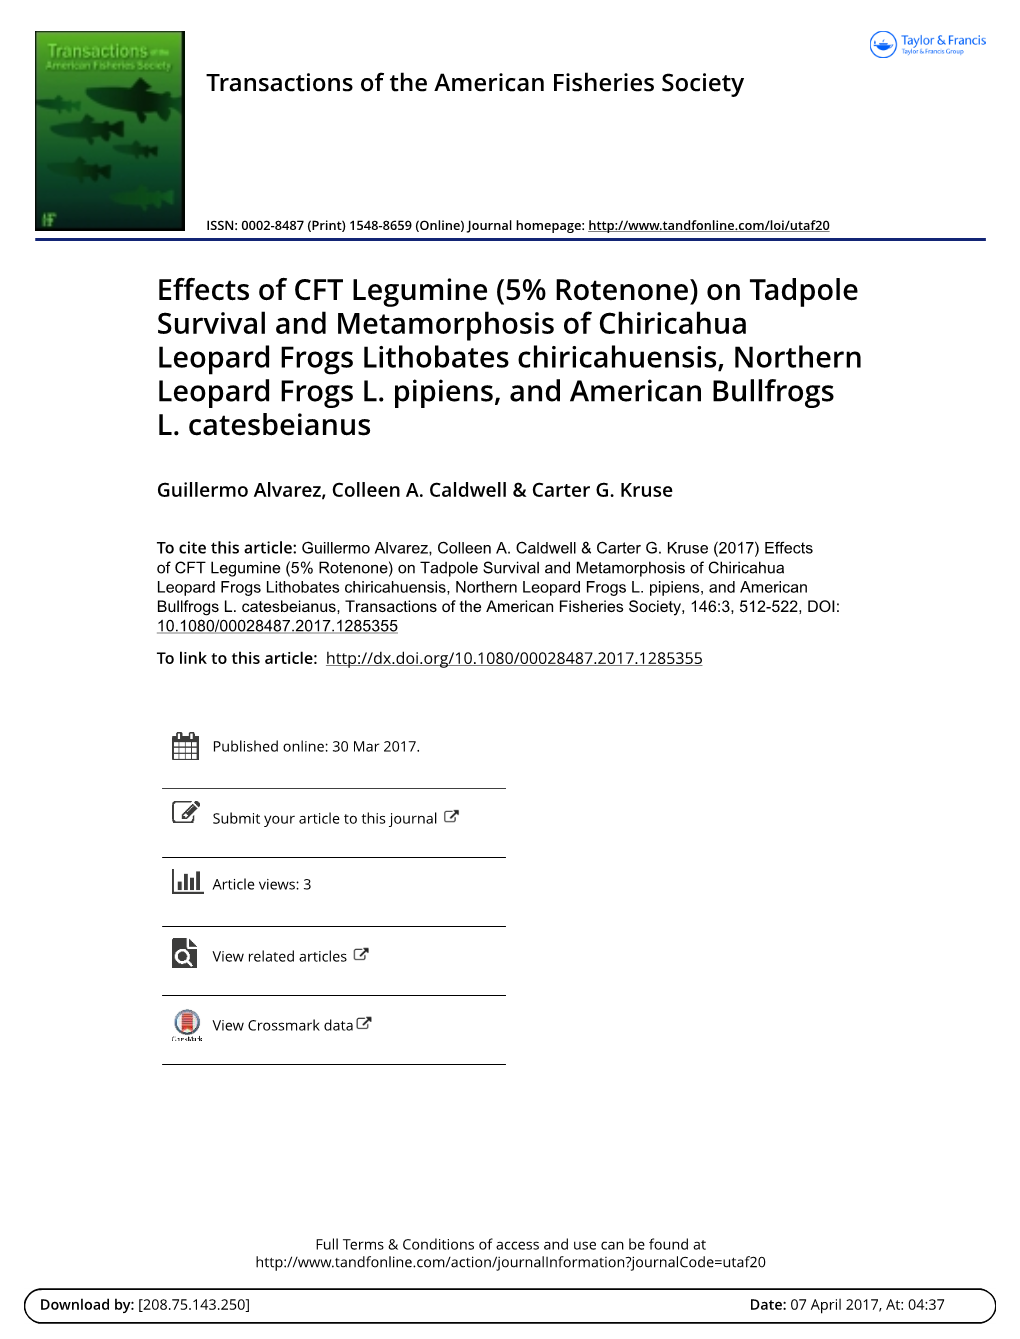 Effects of CFT Legumine (5% Rotenone) on Tadpole Survival and Metamorphosis of Chiricahua Leopard Frogs Lithobates Chiricahuensis, Northern Leopard Frogs L